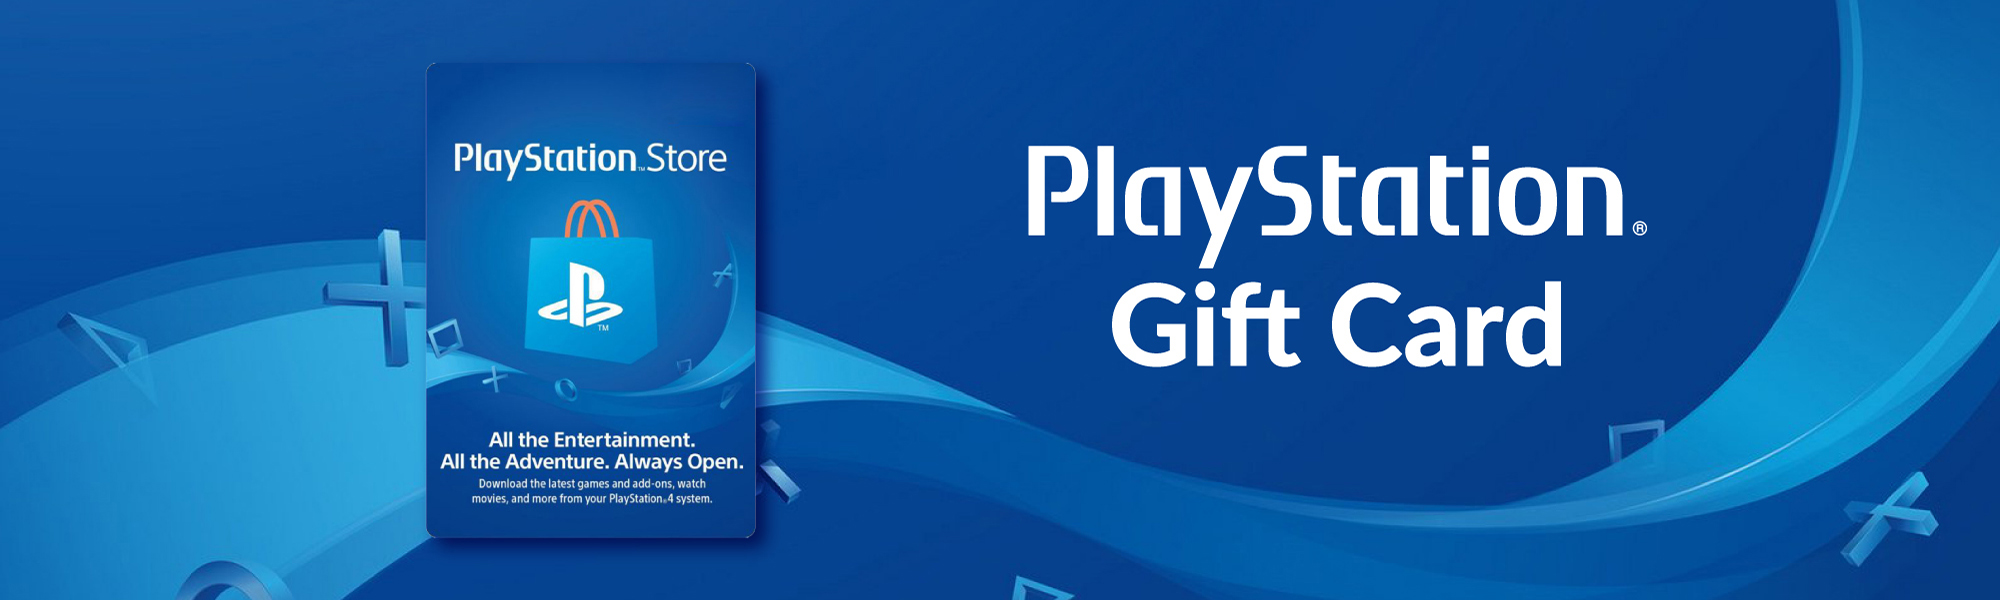 Play station gift cards